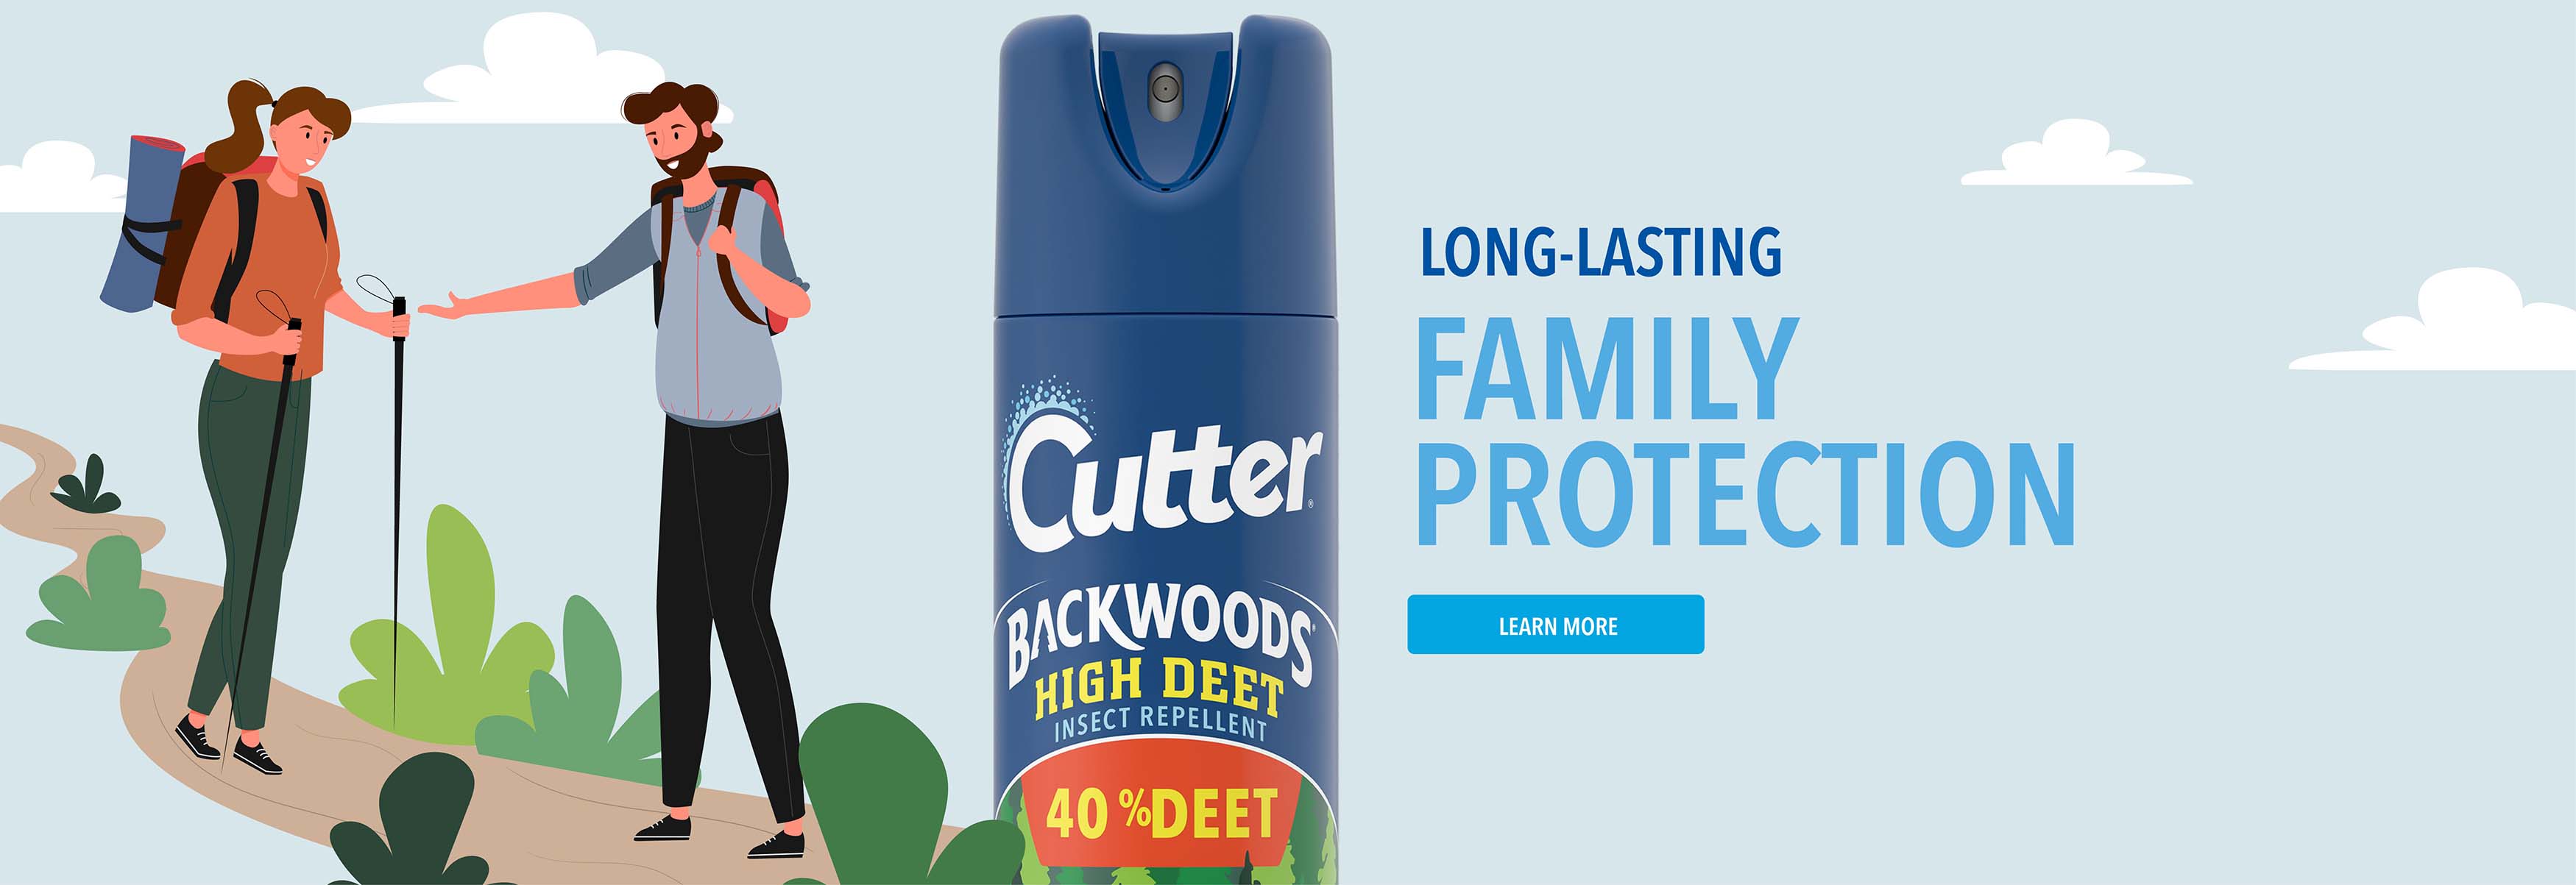 LONG-LASTING FAMILY PROTECTION